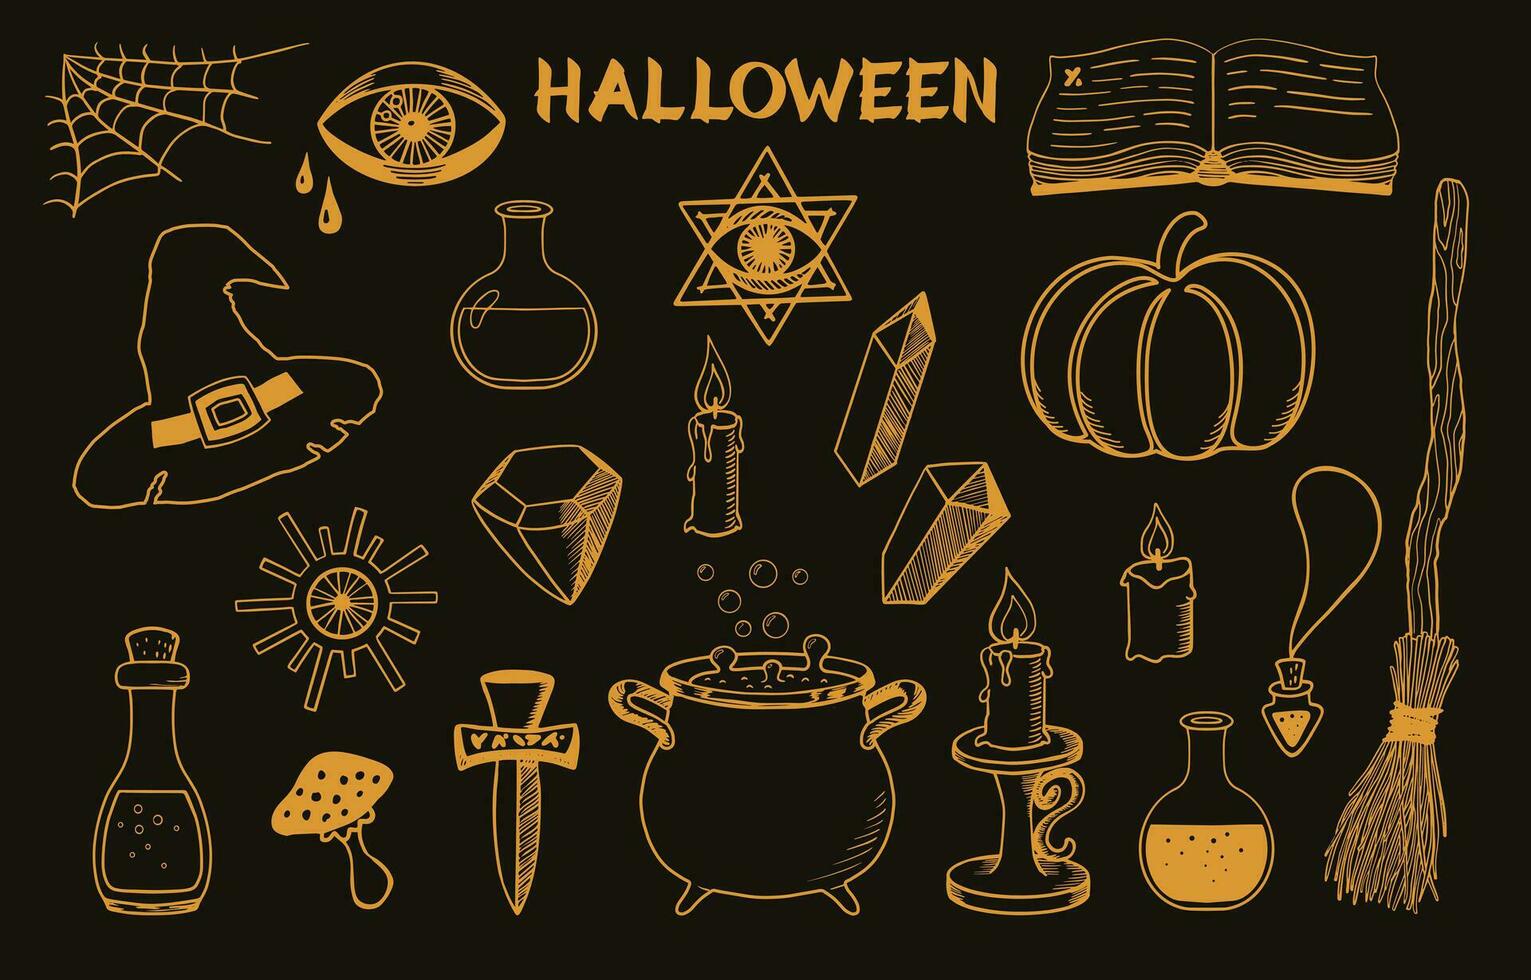 Halloween design elements set. Magical hand drawn symbols. Witch cauldron, hat, broom, candles and other objects for Halloween. Sketch style. Vector illustration